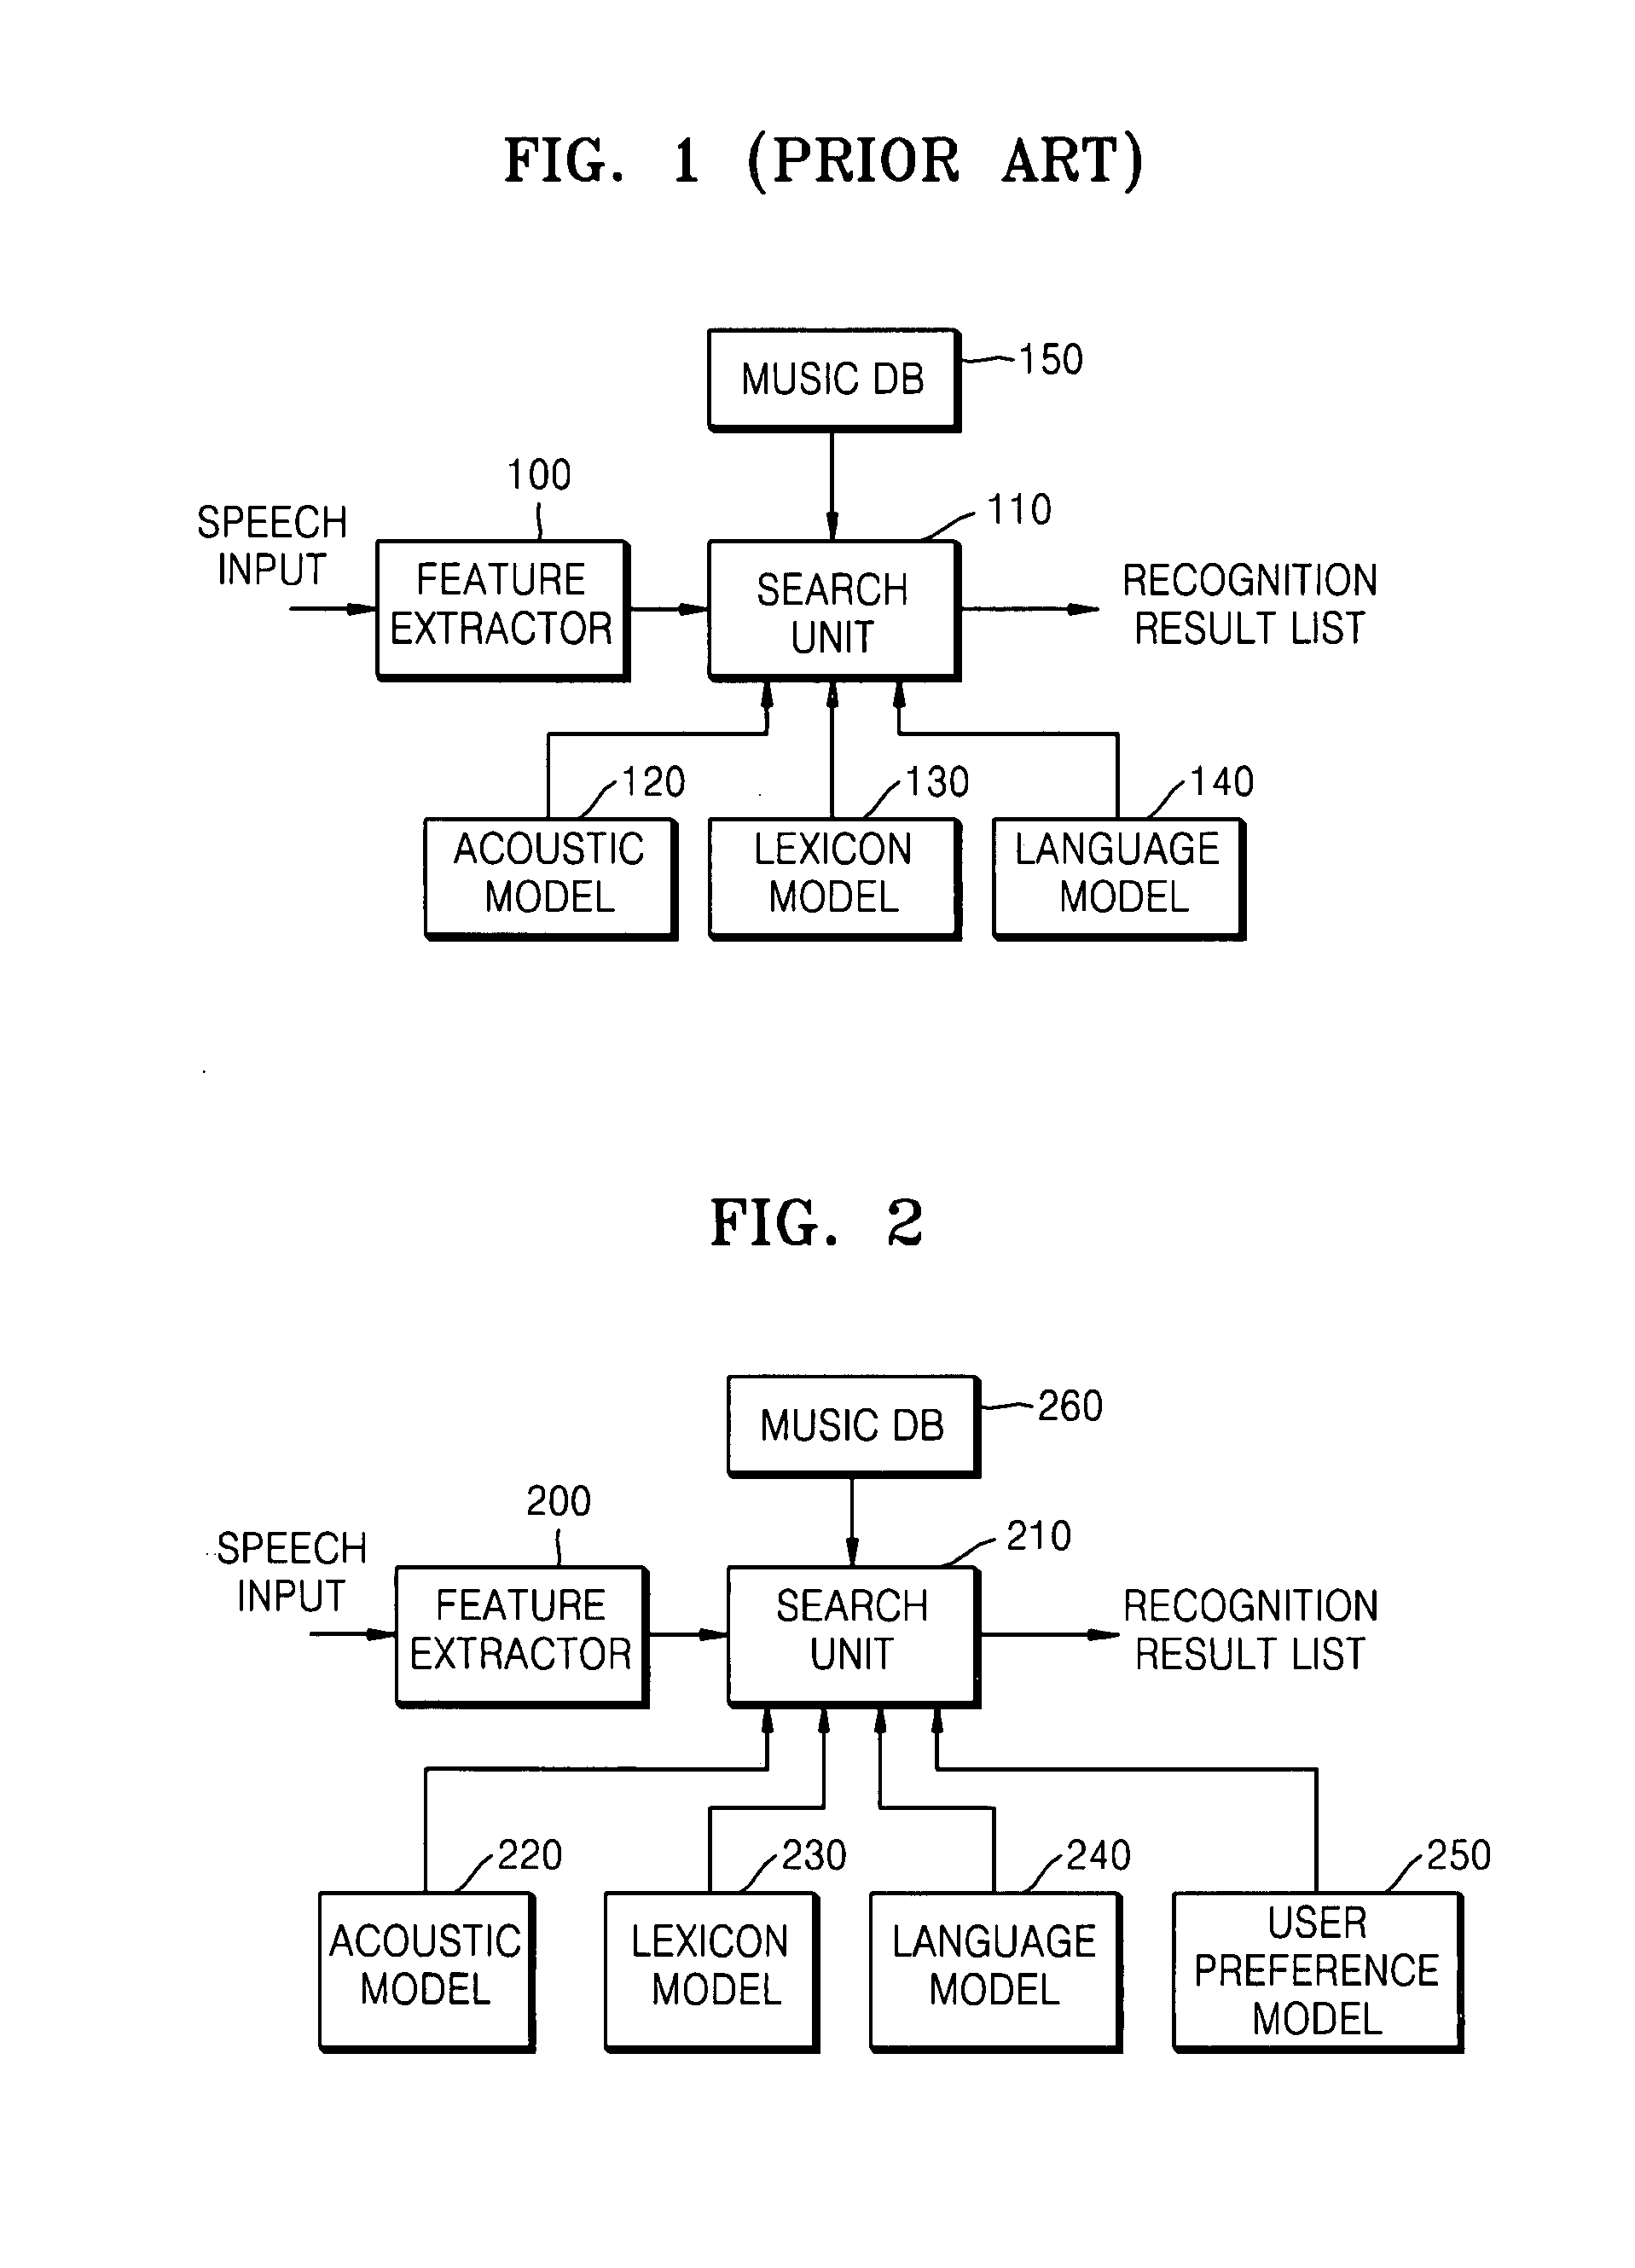 Method and apparatus for searching for music based on speech recognition